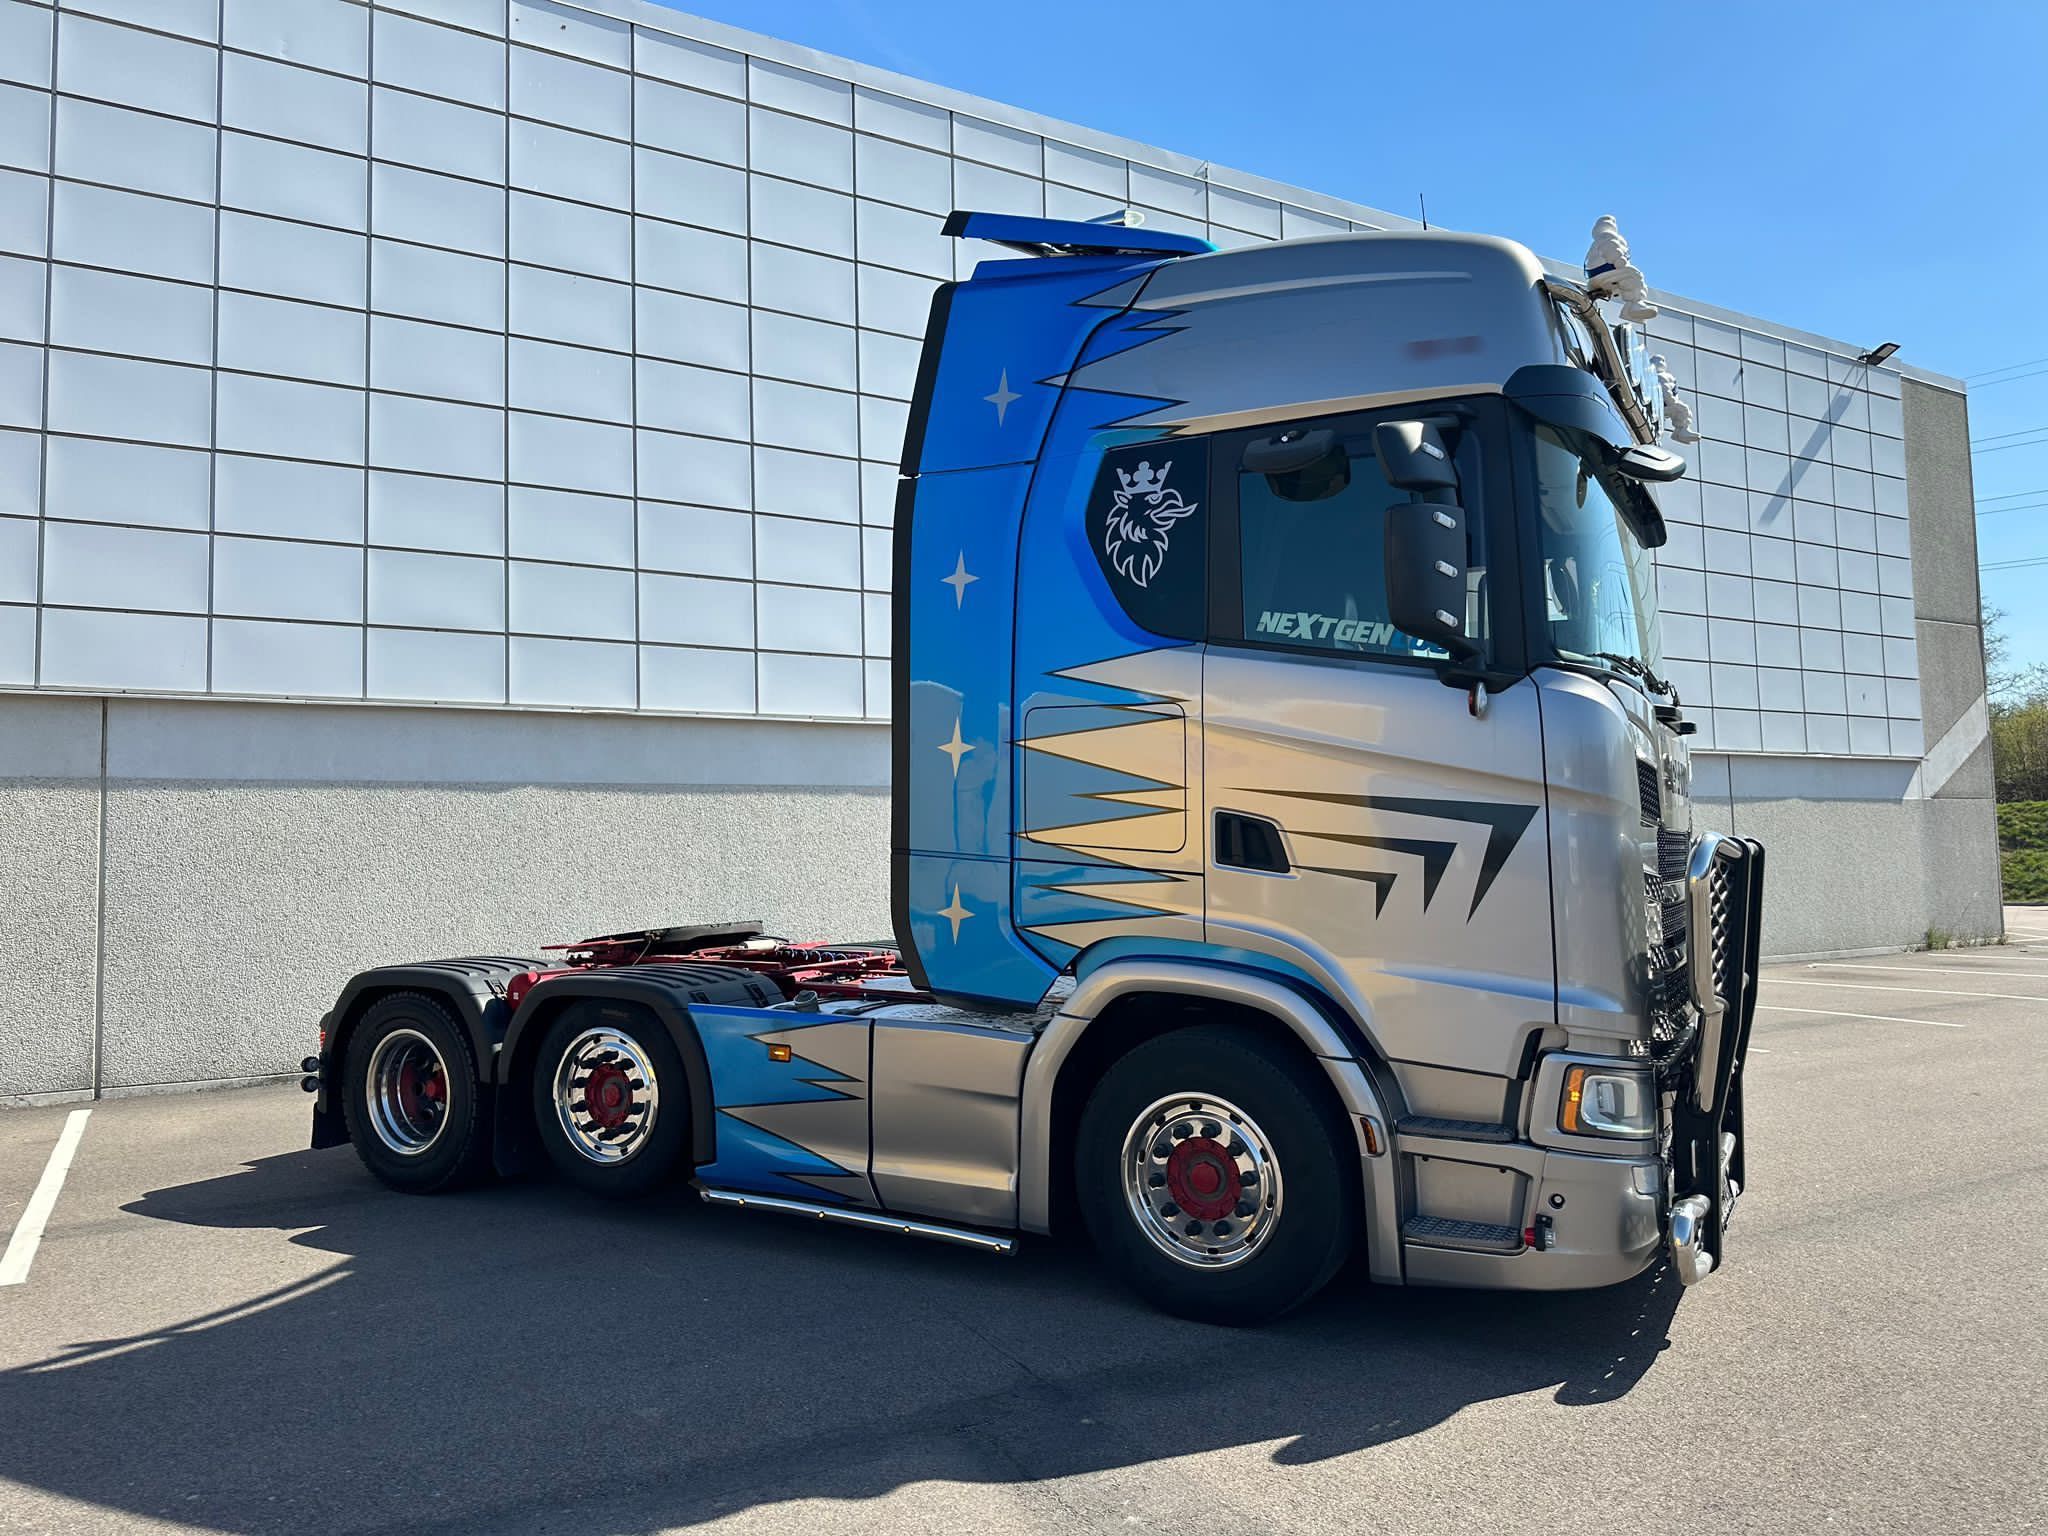 SCANIA S500 SPECIAL 6x2 74000 KG